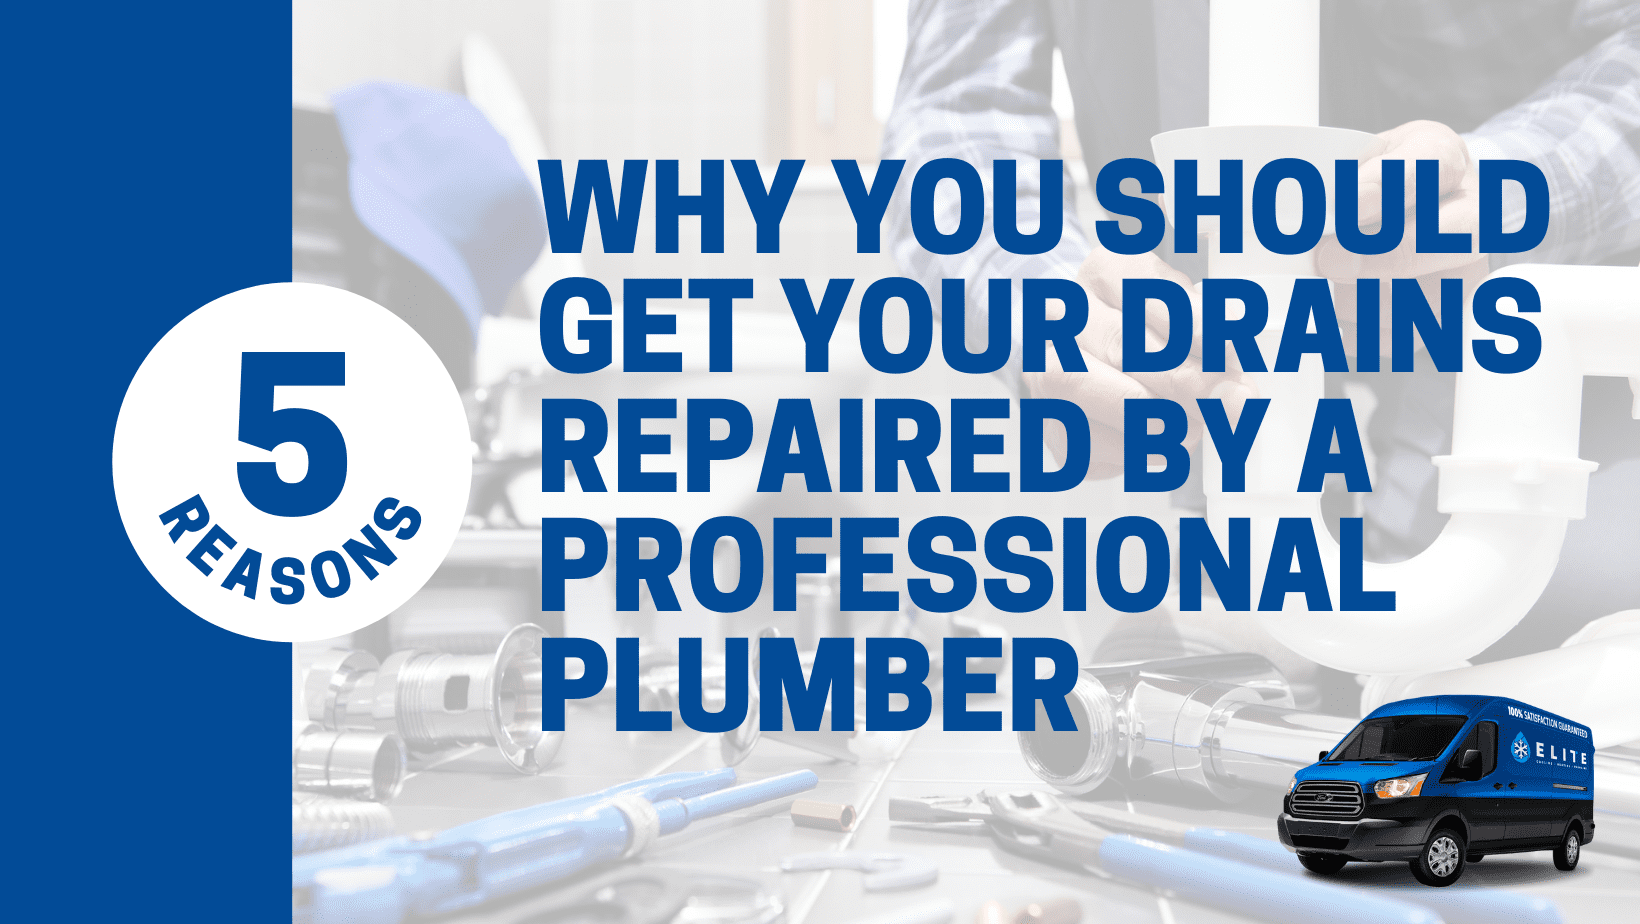 5 Reasons: Why You Should Get Your Drains Repaired by a Professional Plumber|Elite Heating and Air